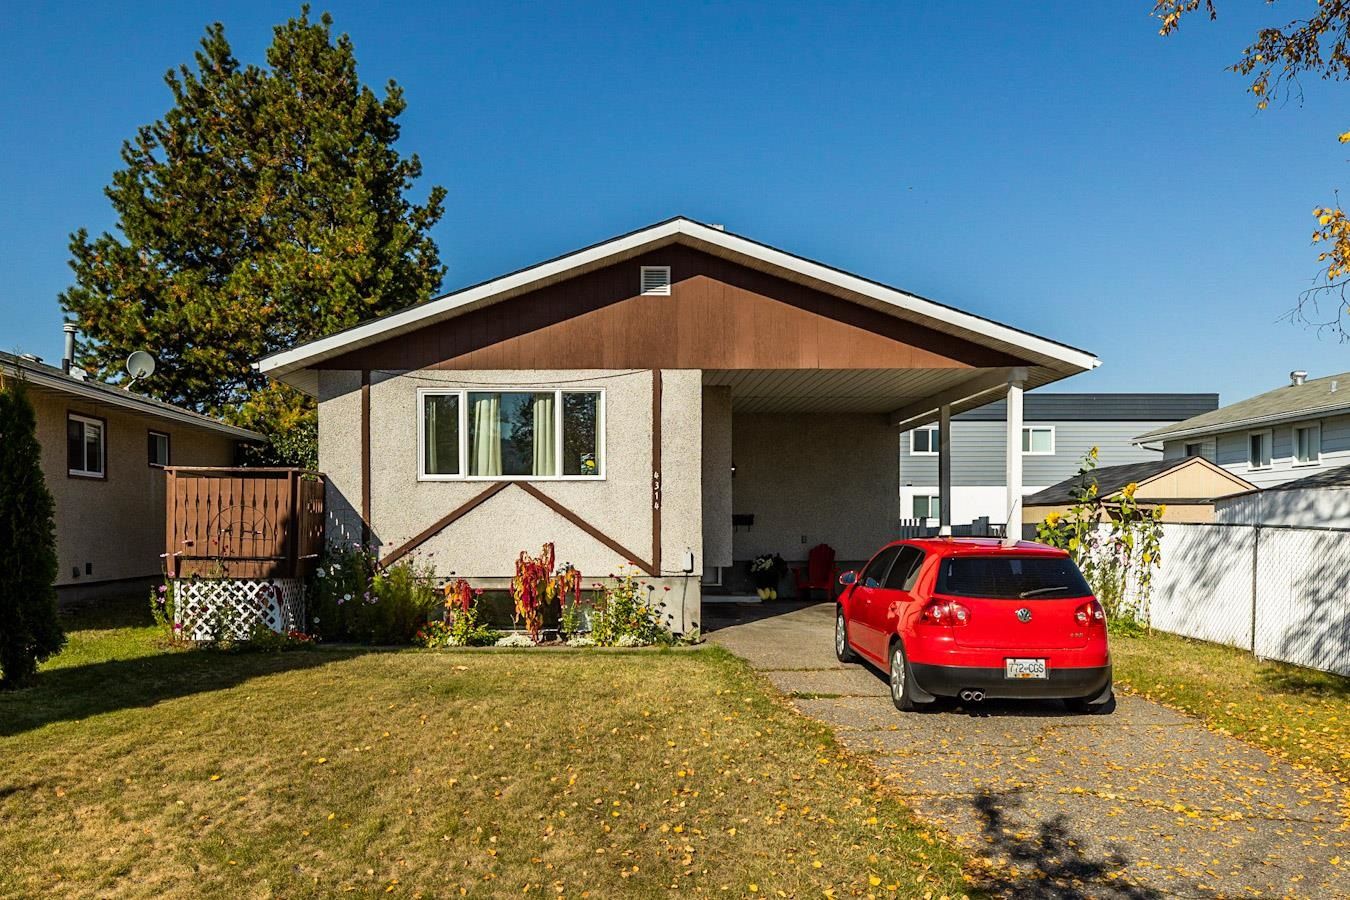 New property listed in Foothills, PG City West